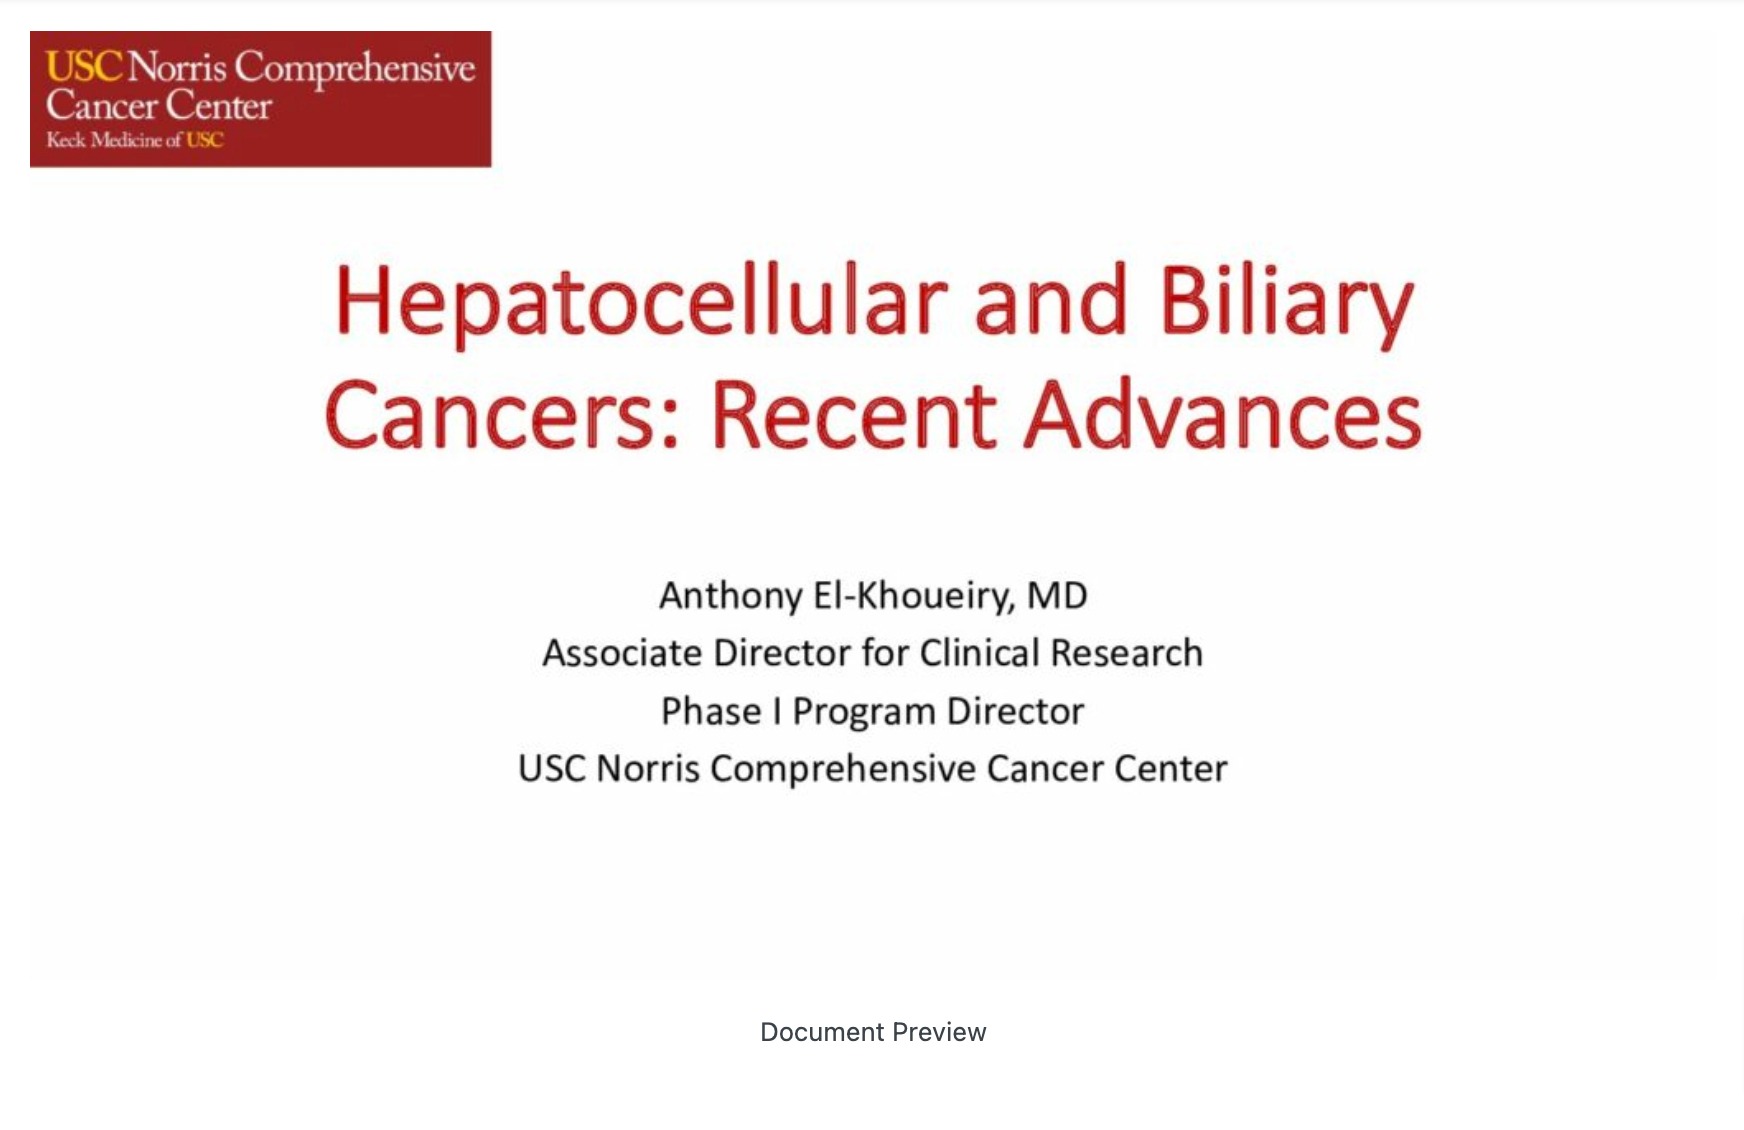 Hepatocellular and Biliary Cancers: Recent advances